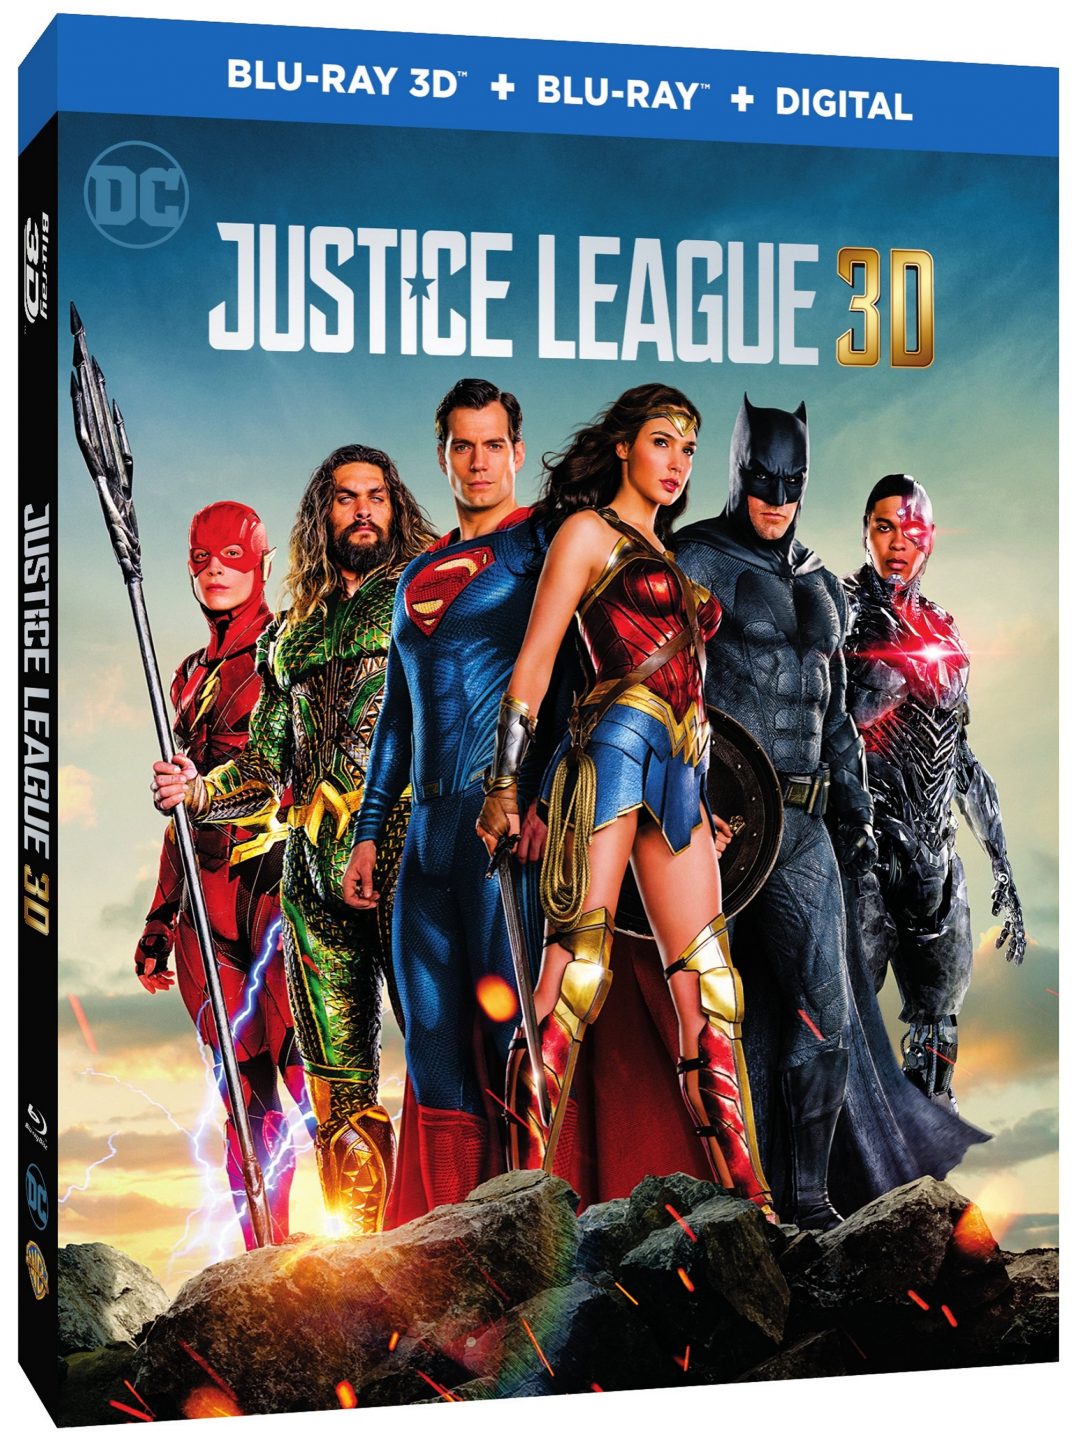 Justice League 3D Blu-Ray Combo cover (Warner Bros. Home Entertainment)